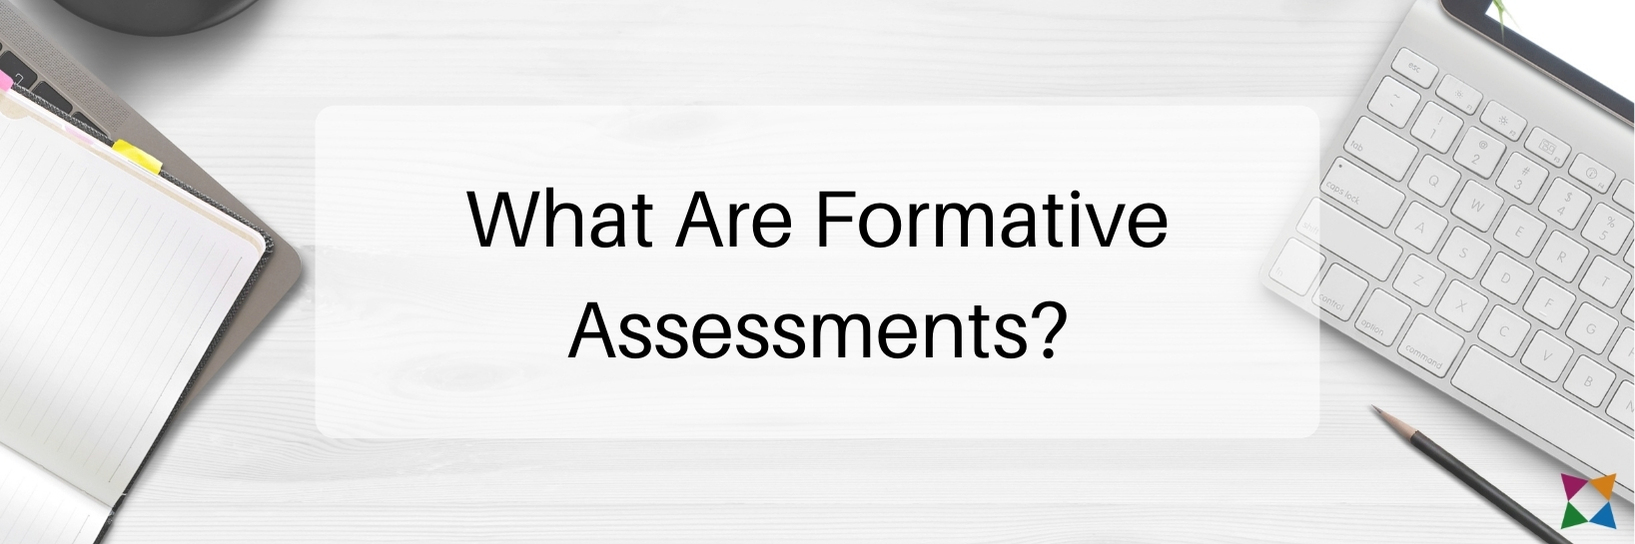 what-are-formative-assessments